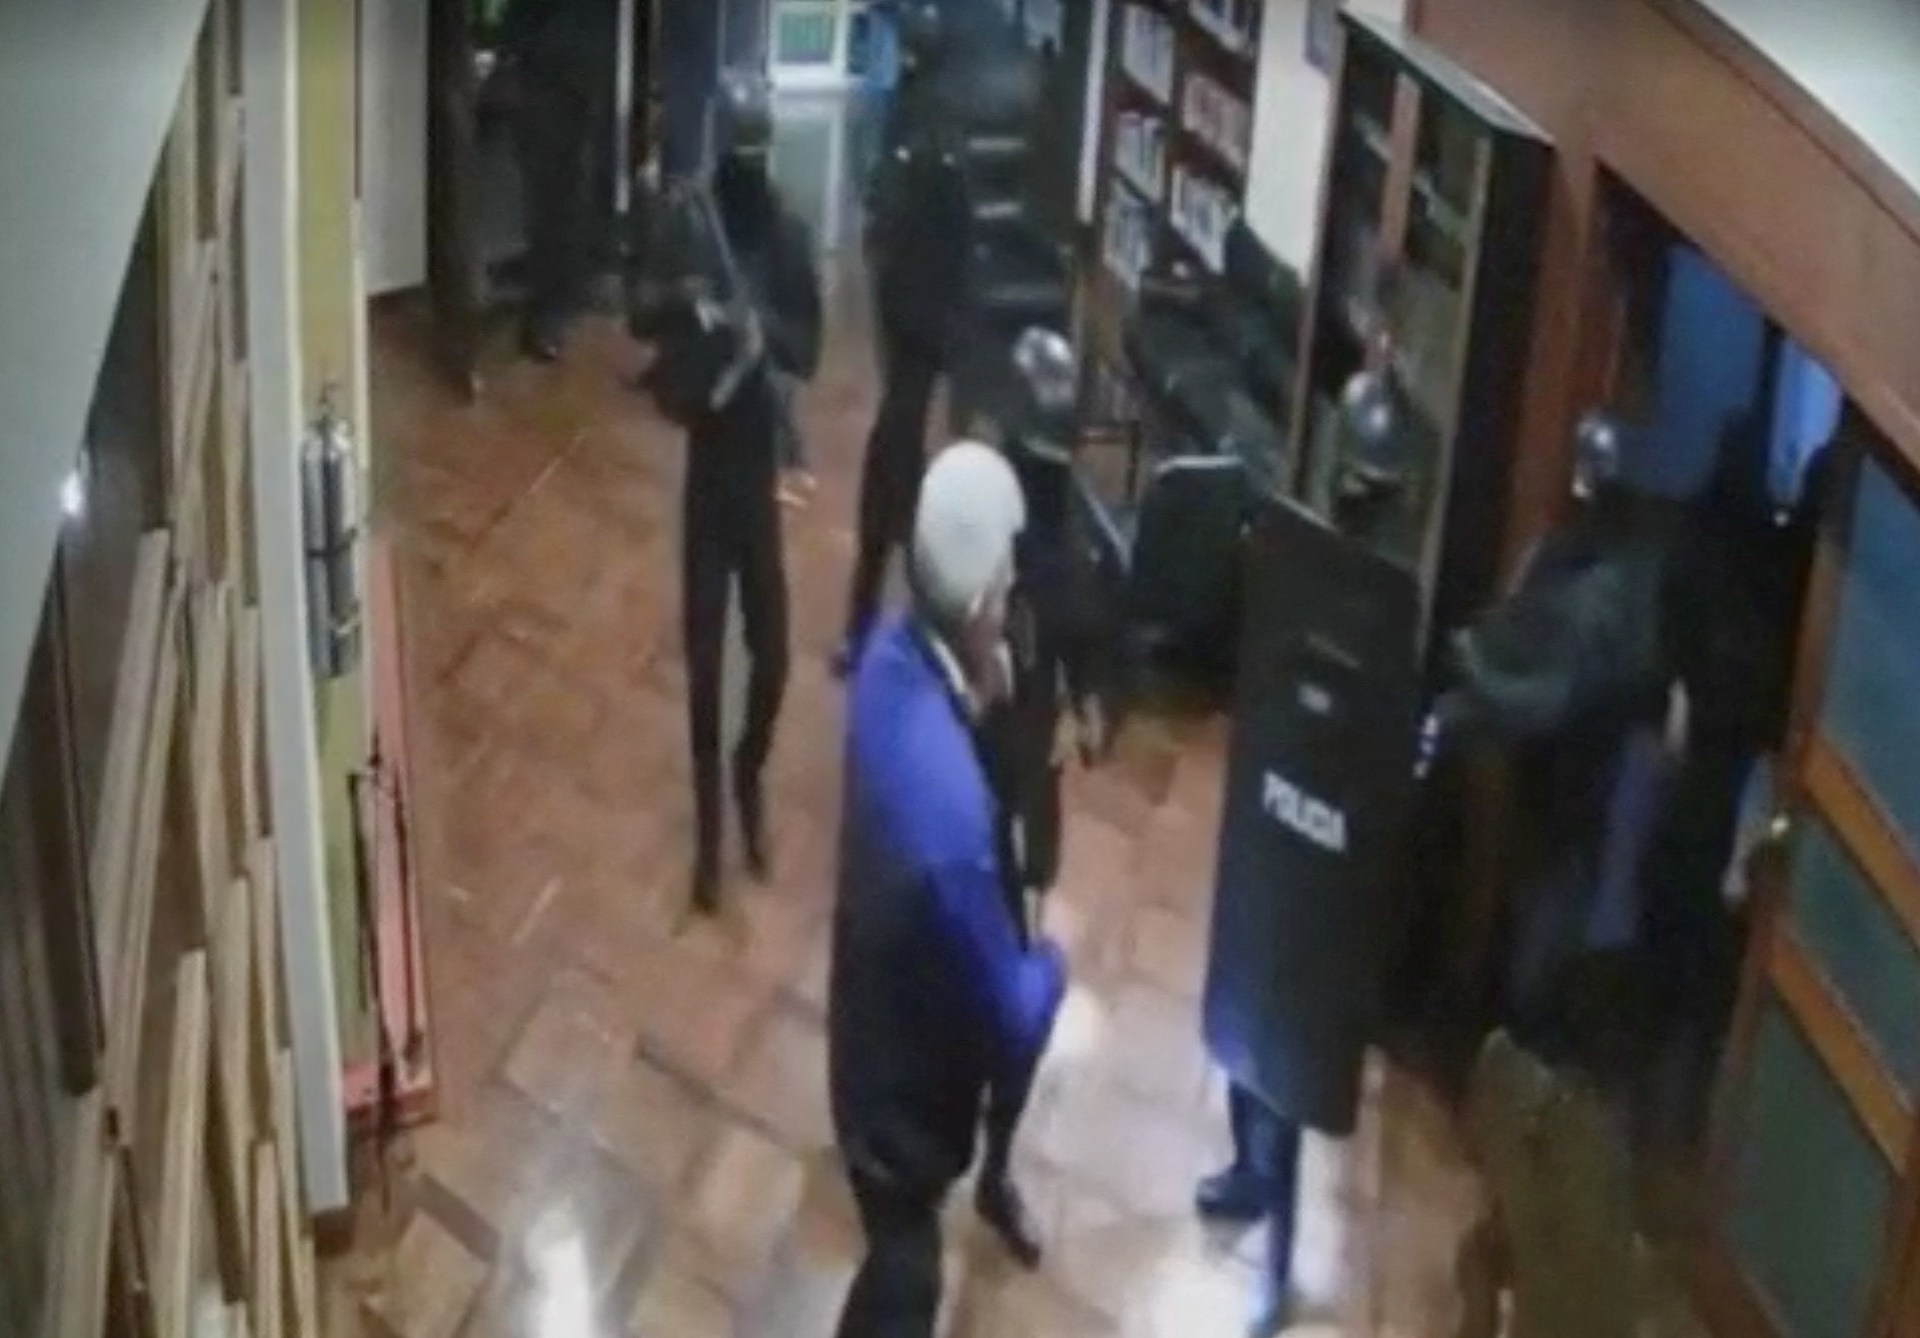 Mexico releases footage of Ecuador police storming its embassy | Politics [Video]